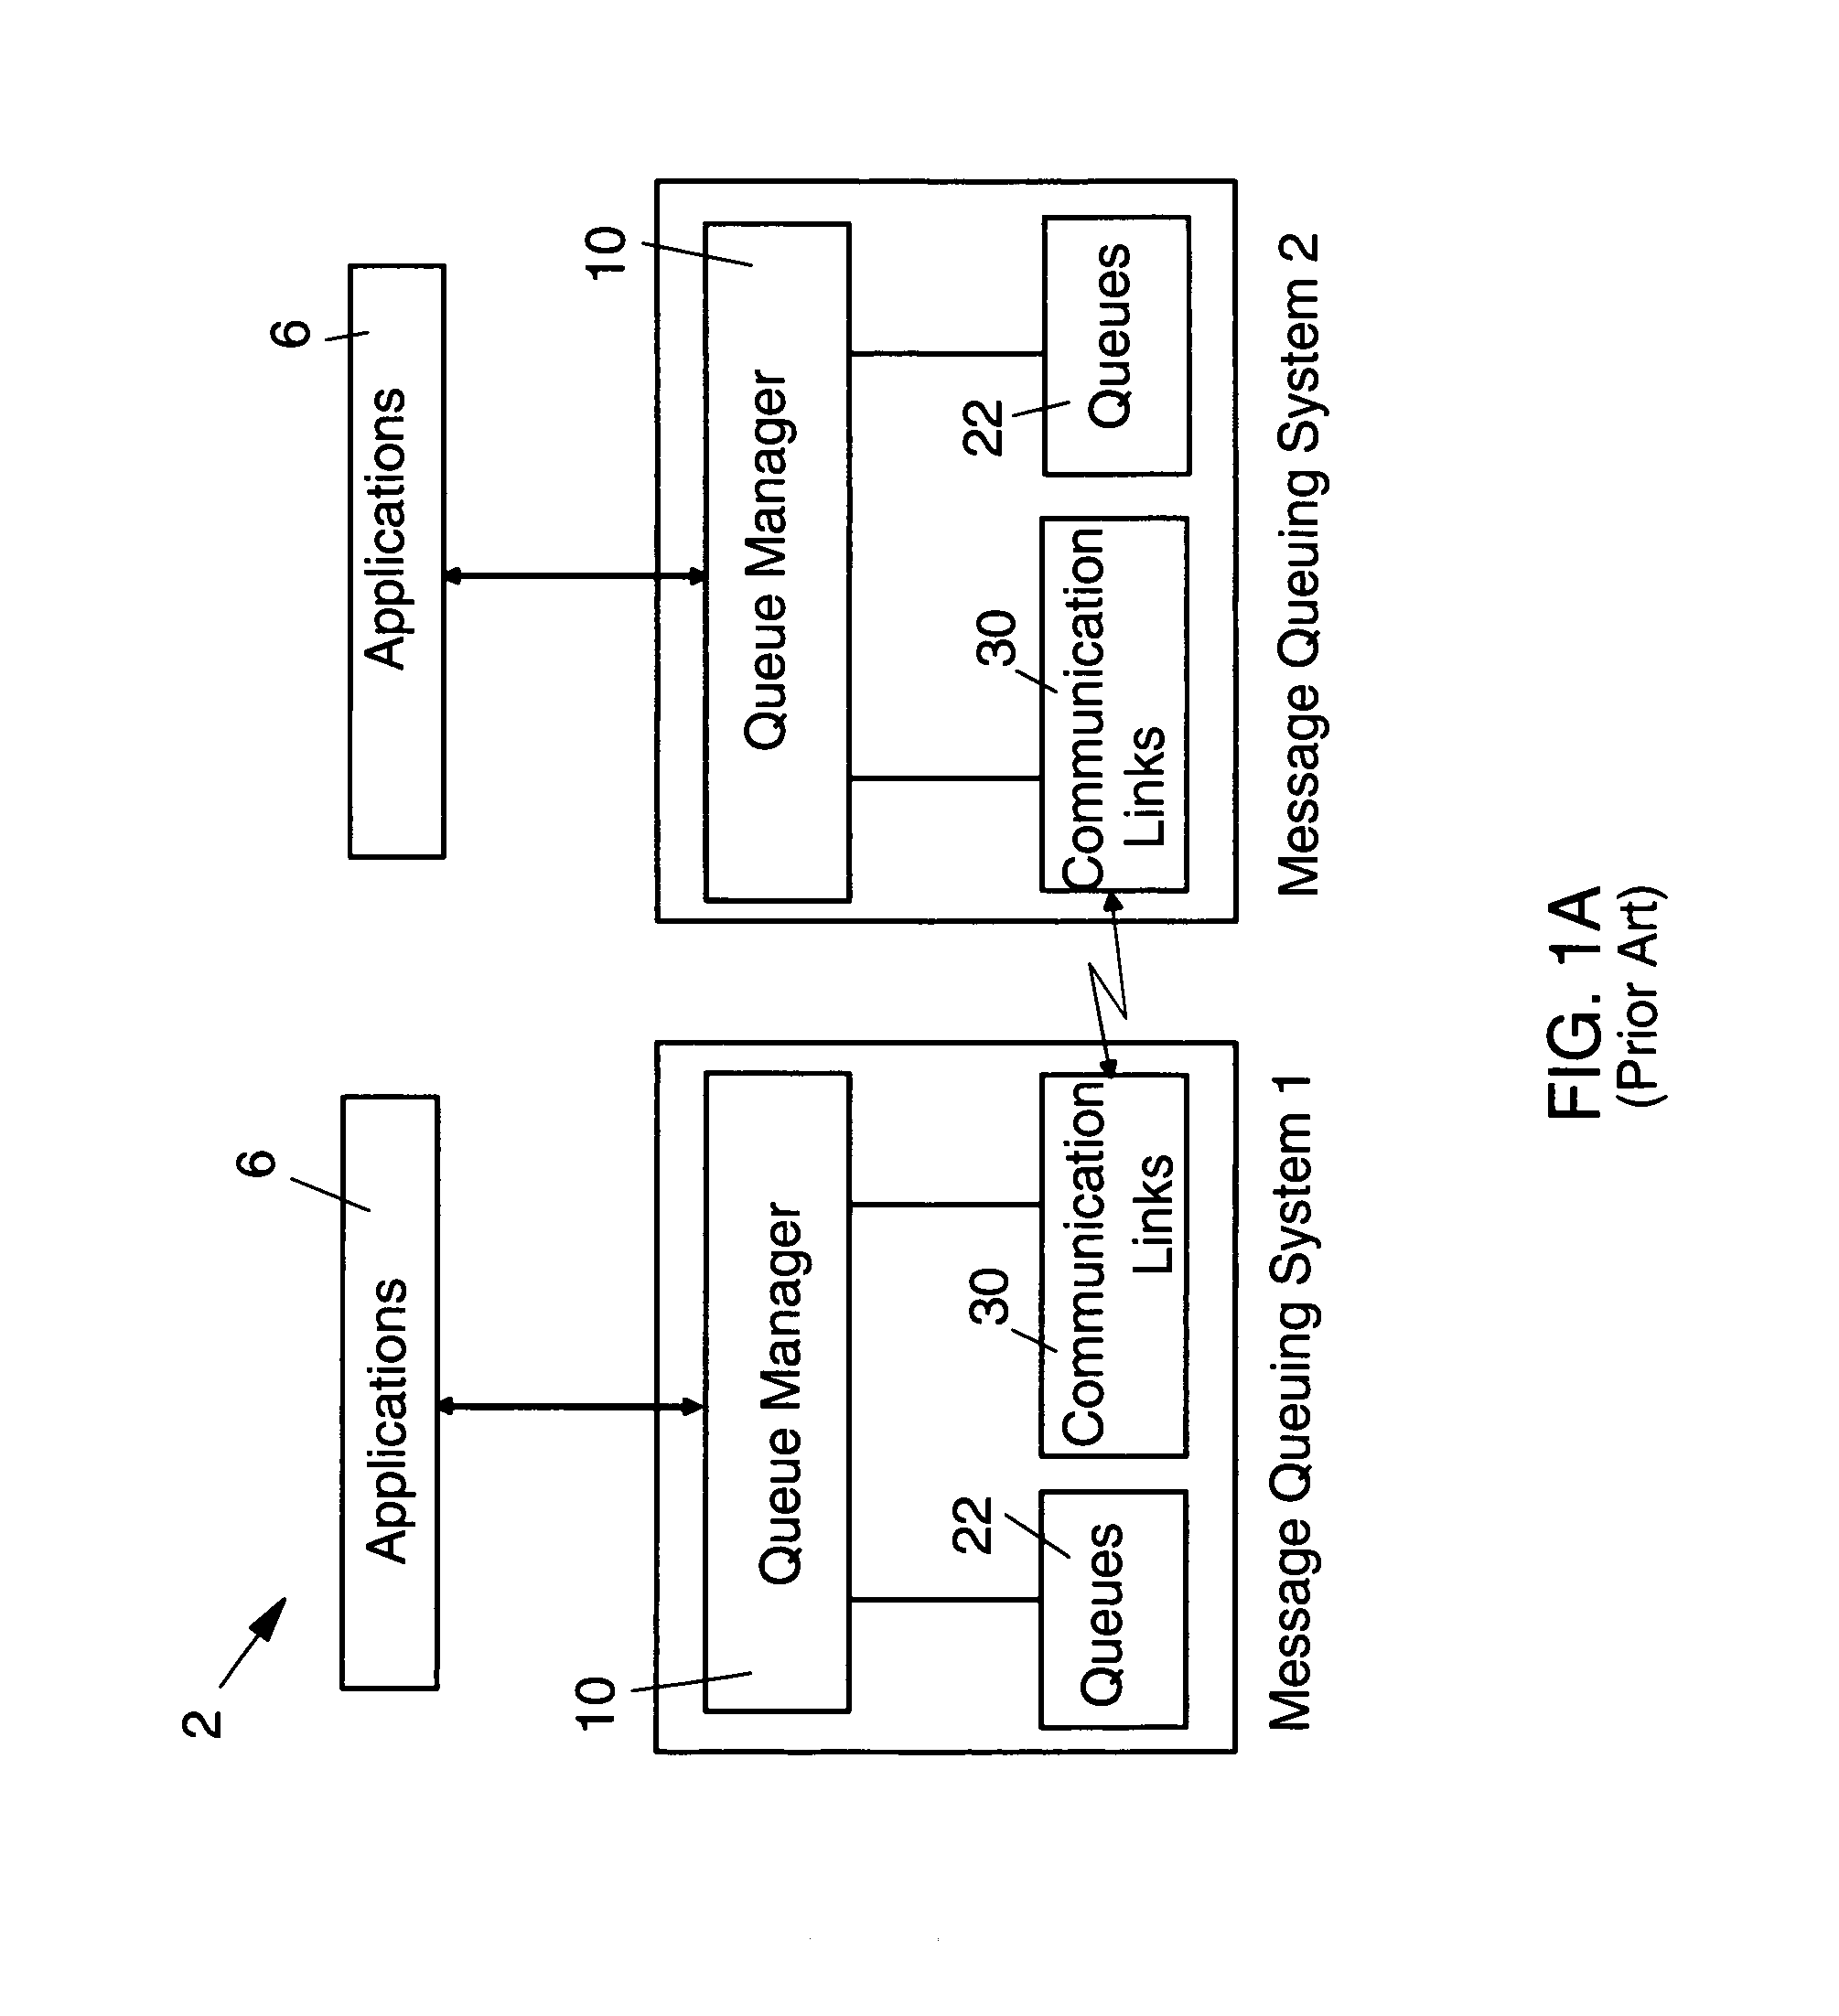 System, method and computer program product for dynamically changing message priority or message sequence number in a message queuing system based on processing conditions